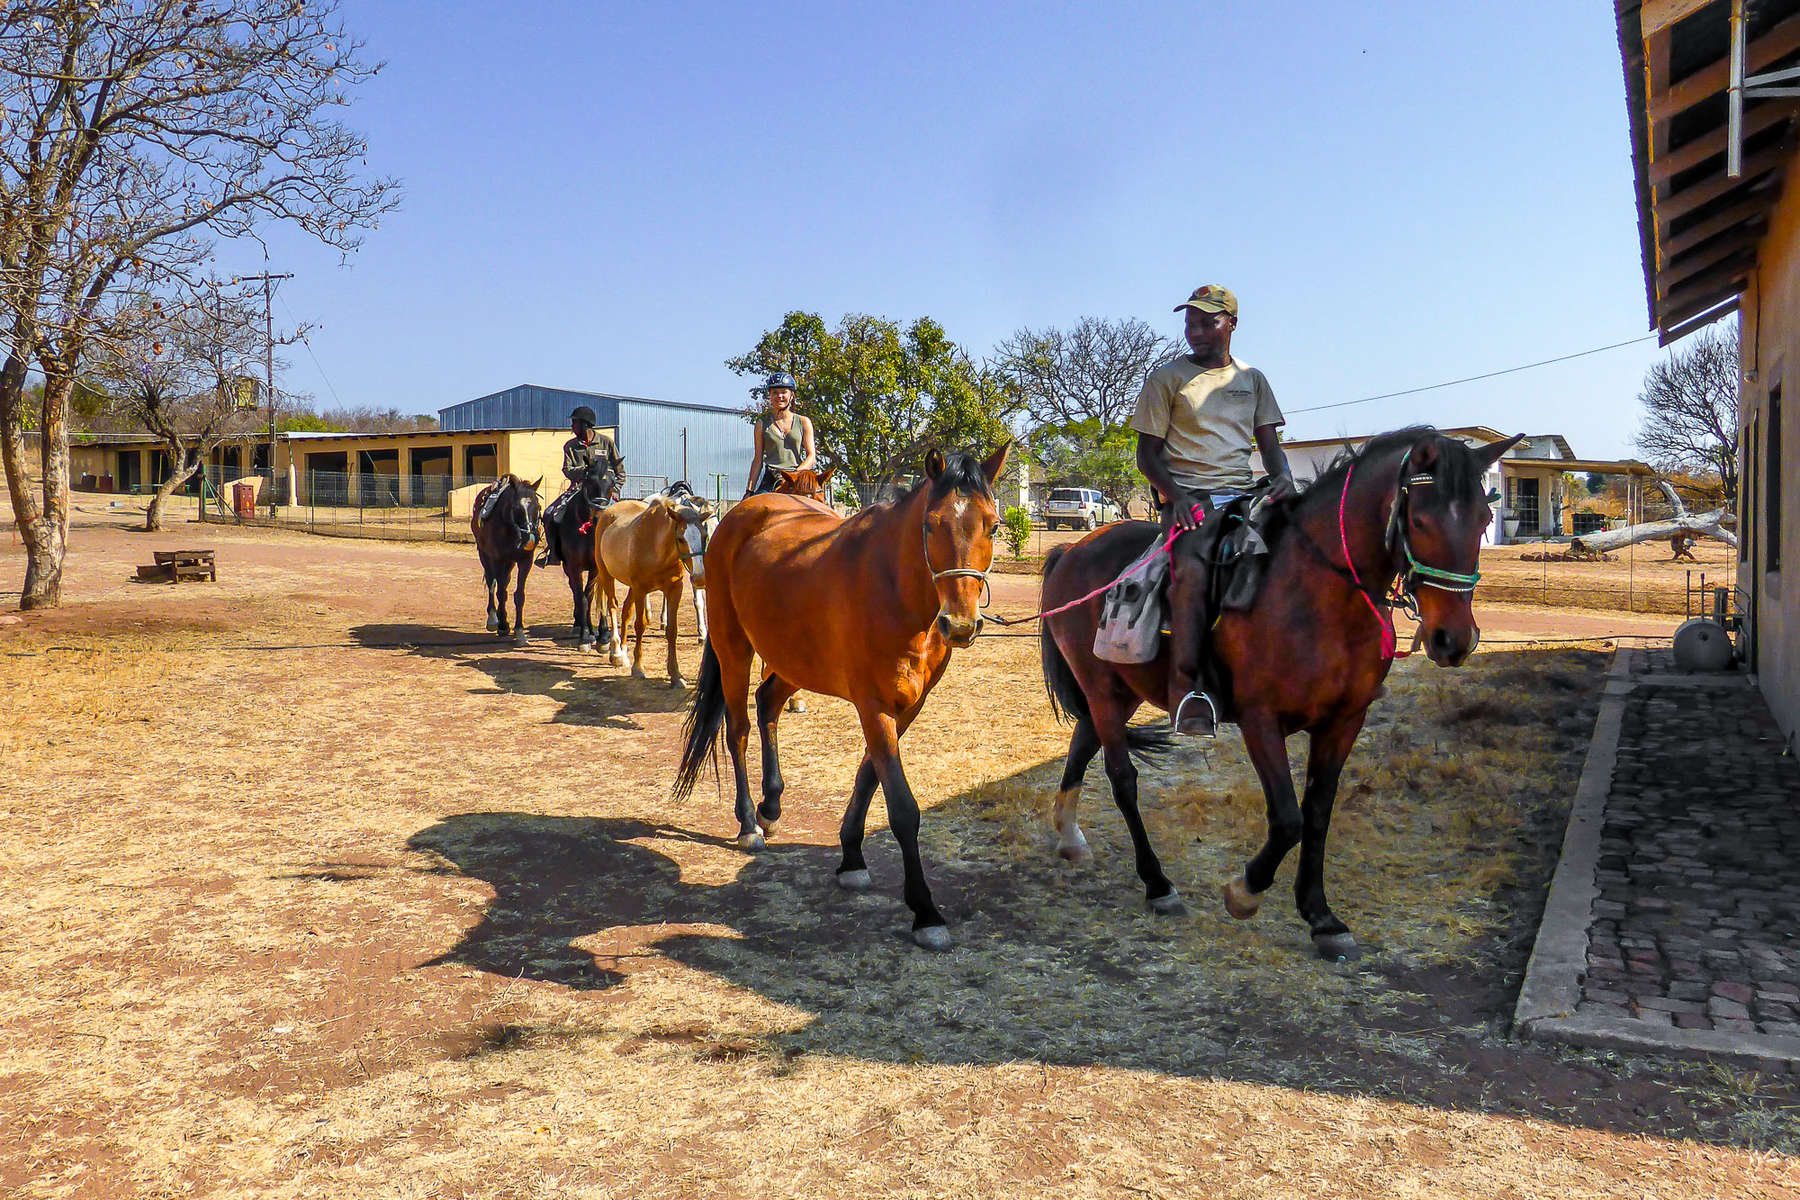 Riders riding while guiding other horses in South Africa